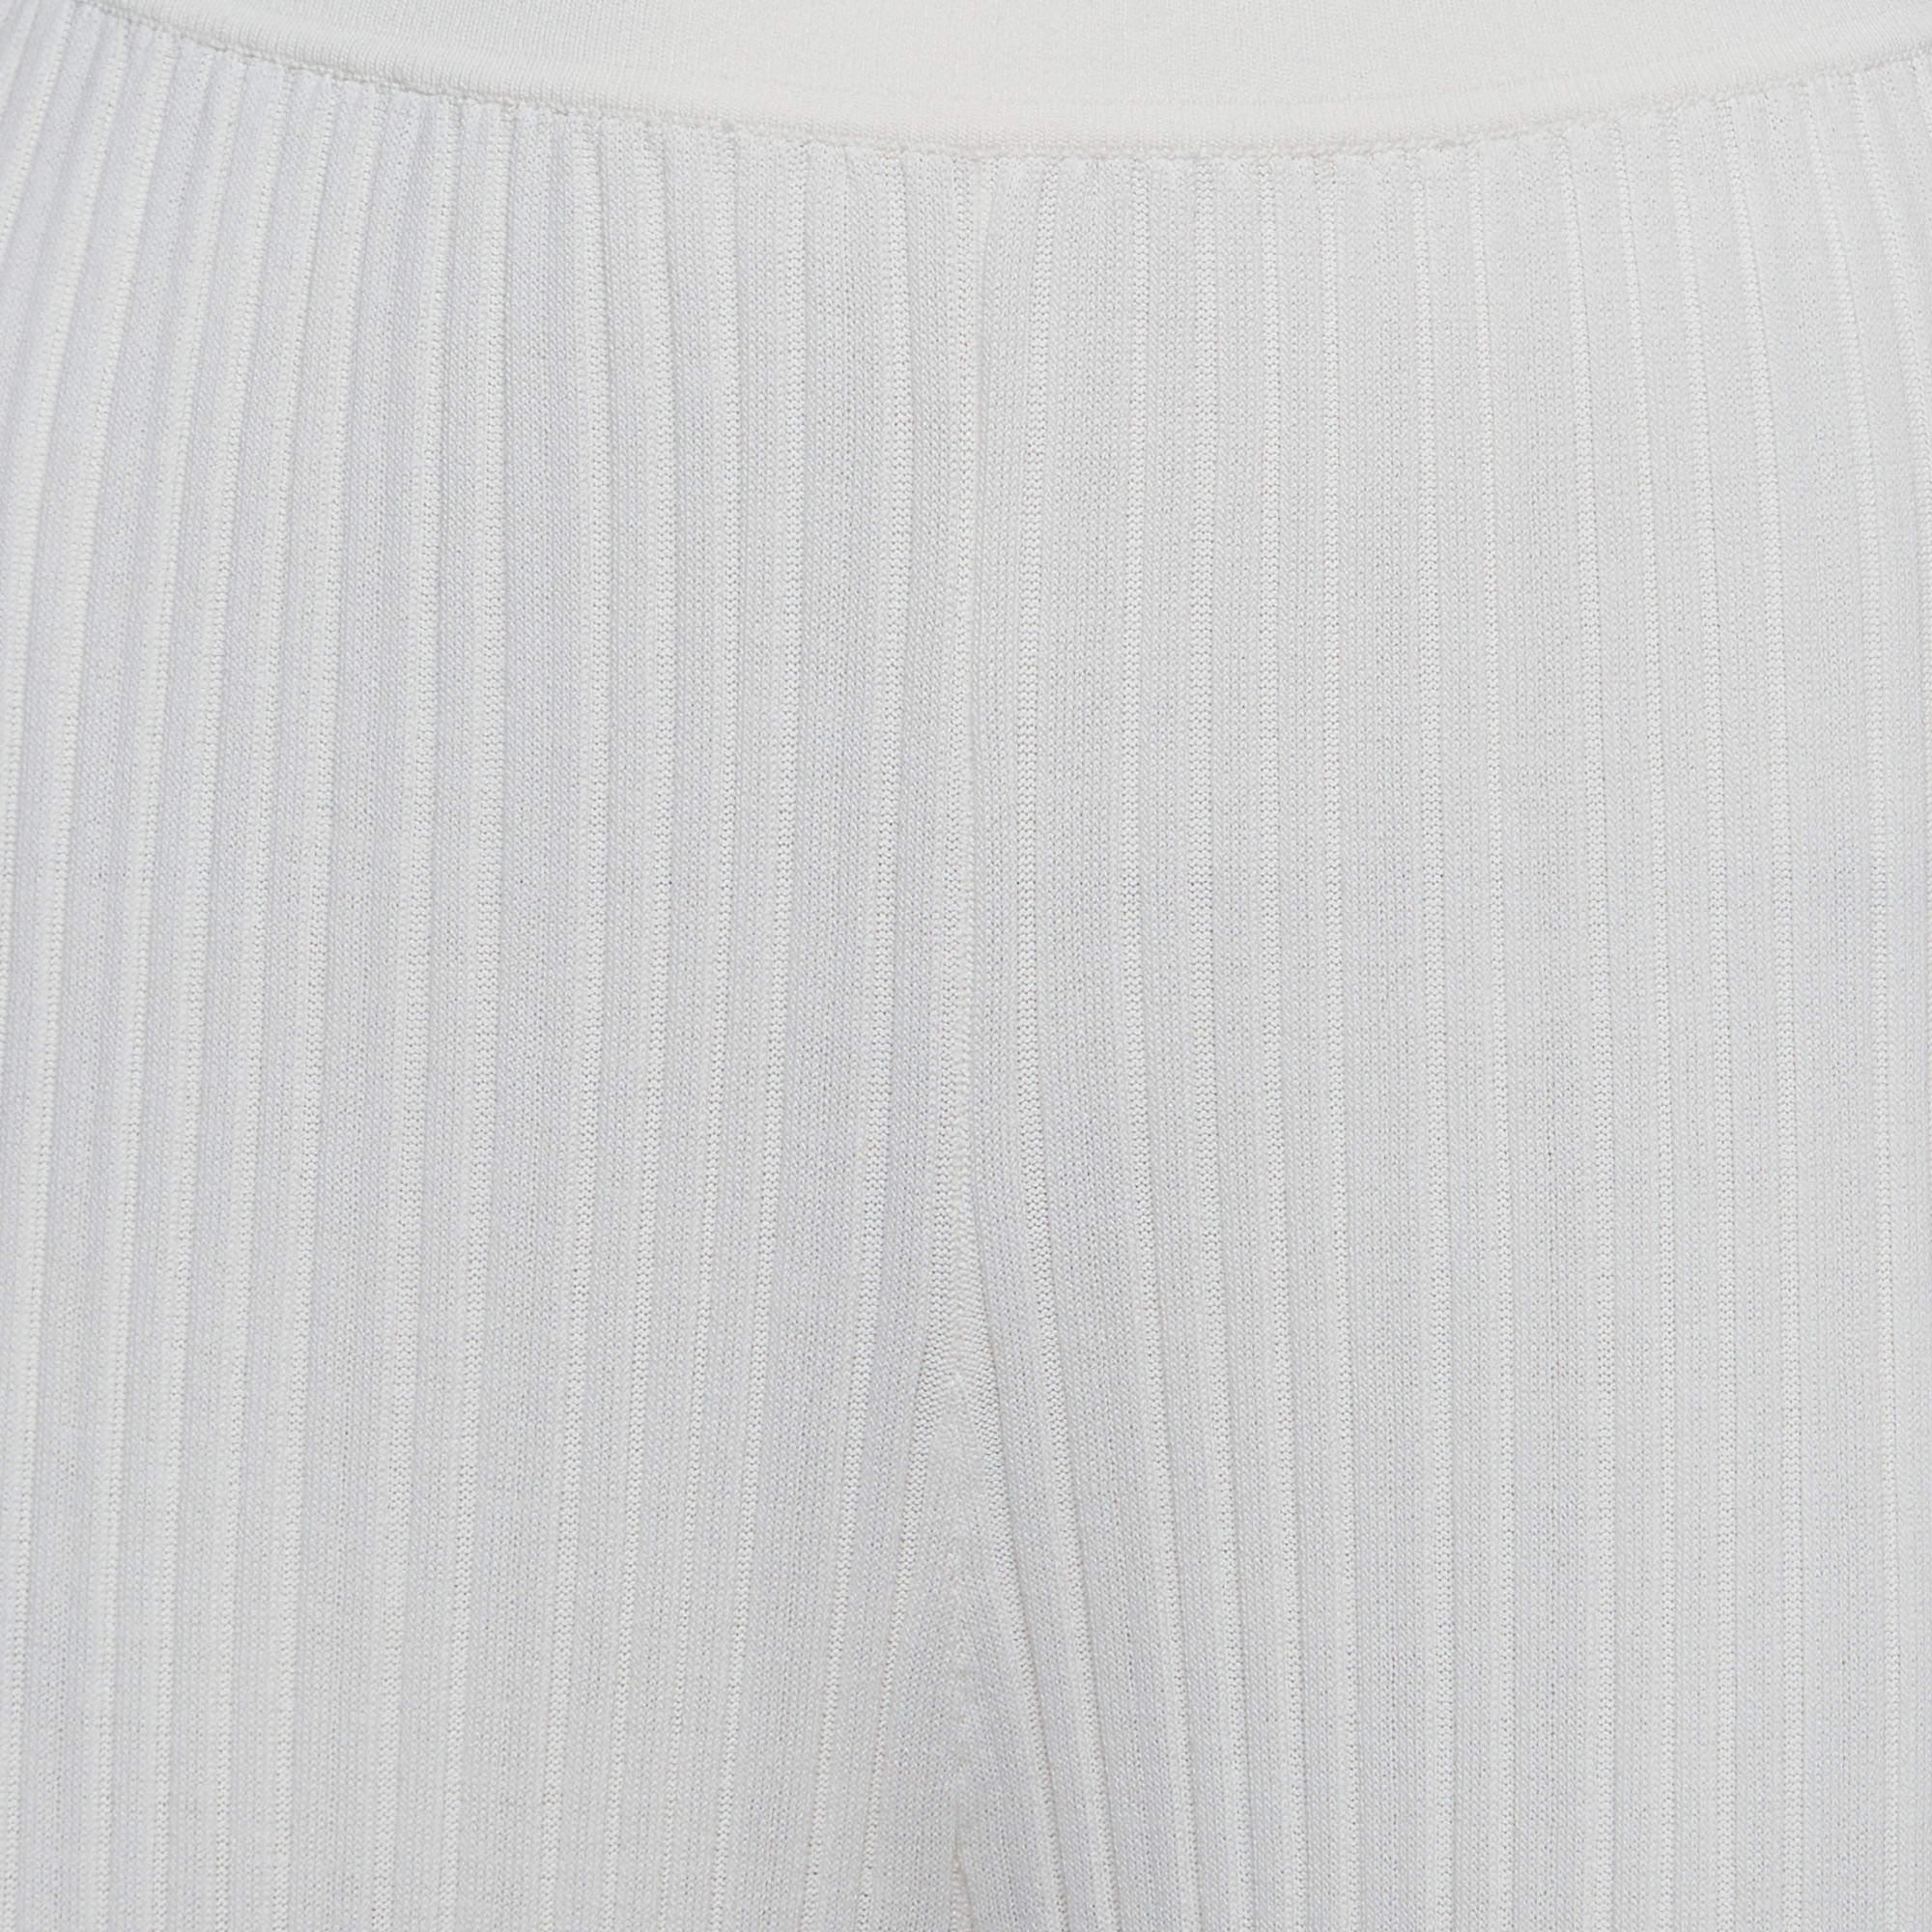 Dion Lee Ivory White Ribbed Knit Pants M In Excellent Condition For Sale In Dubai, Al Qouz 2